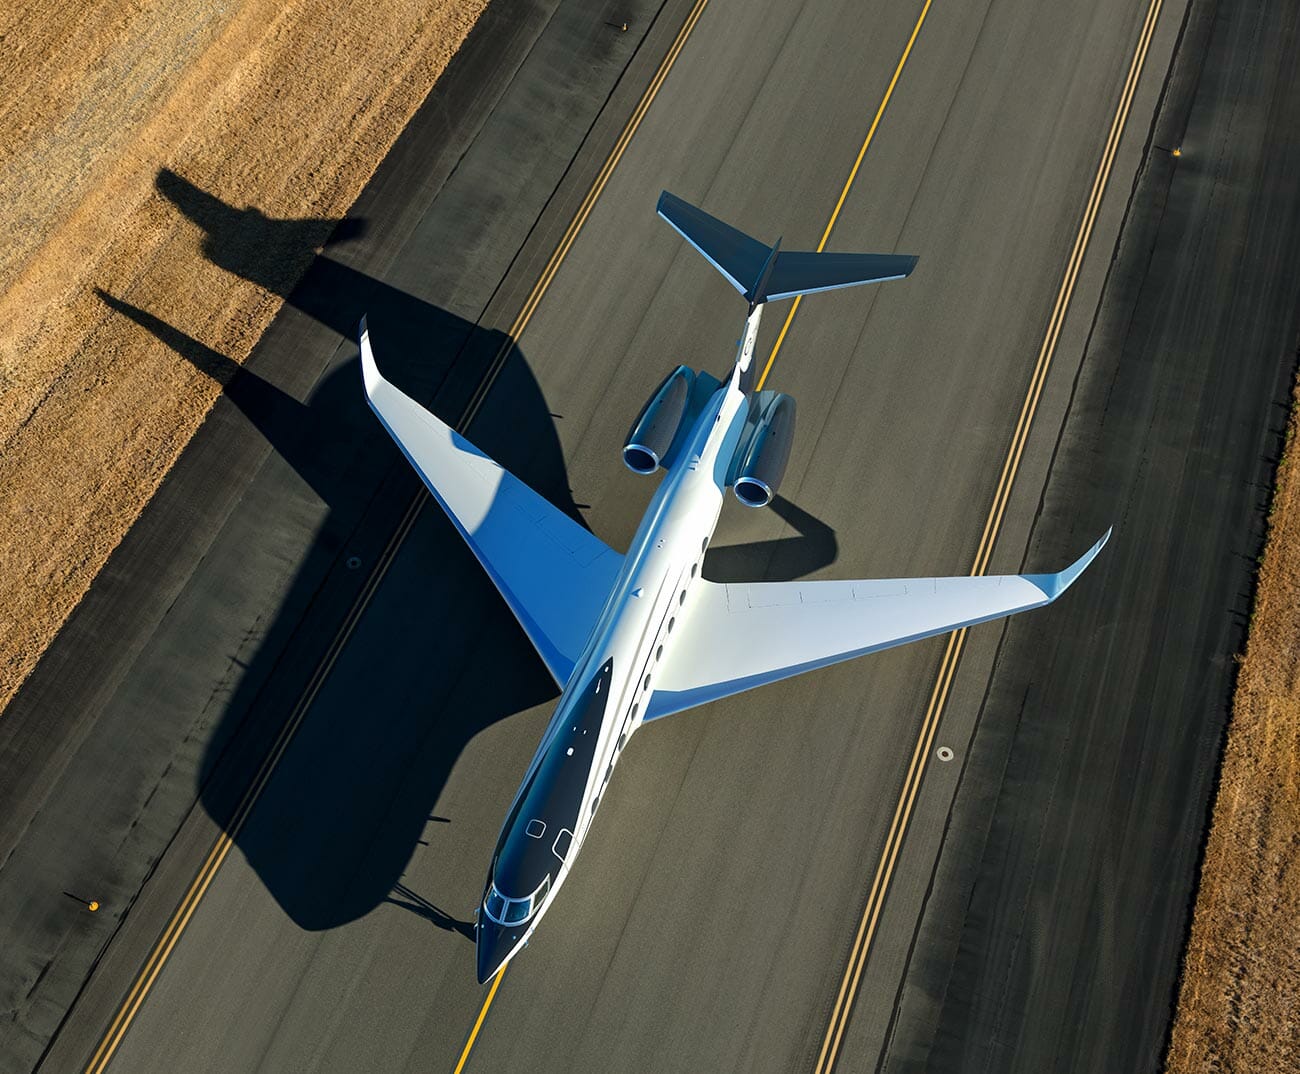 Gulfstream G700 Exterior top down shot on taxiway